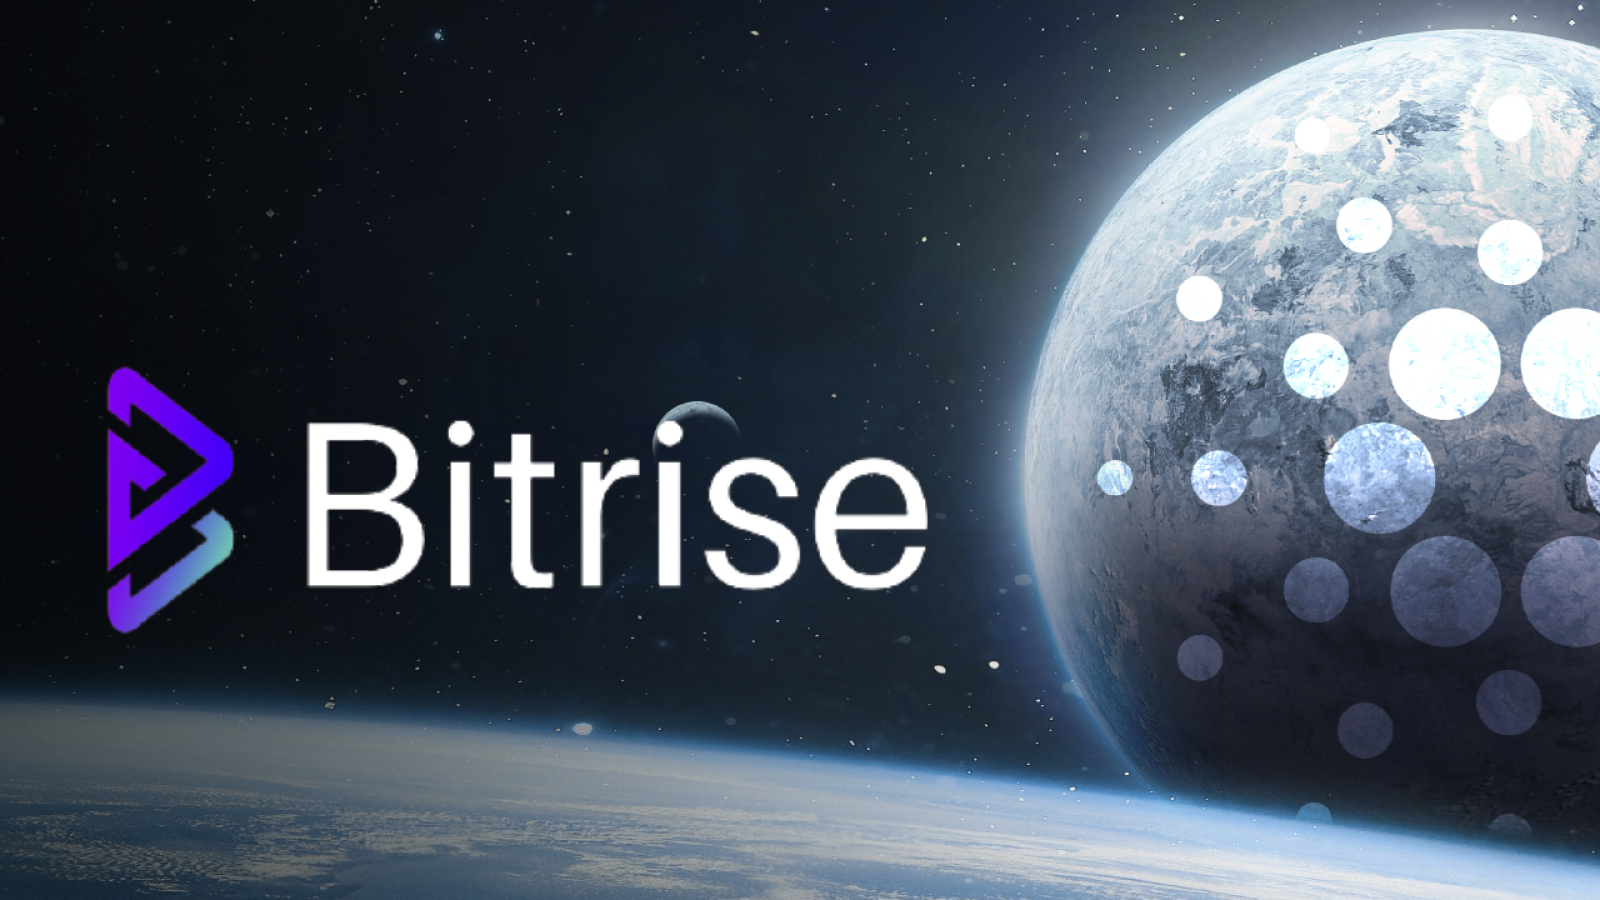 Missed Cardano $ADA? You Need to Check Bitrise